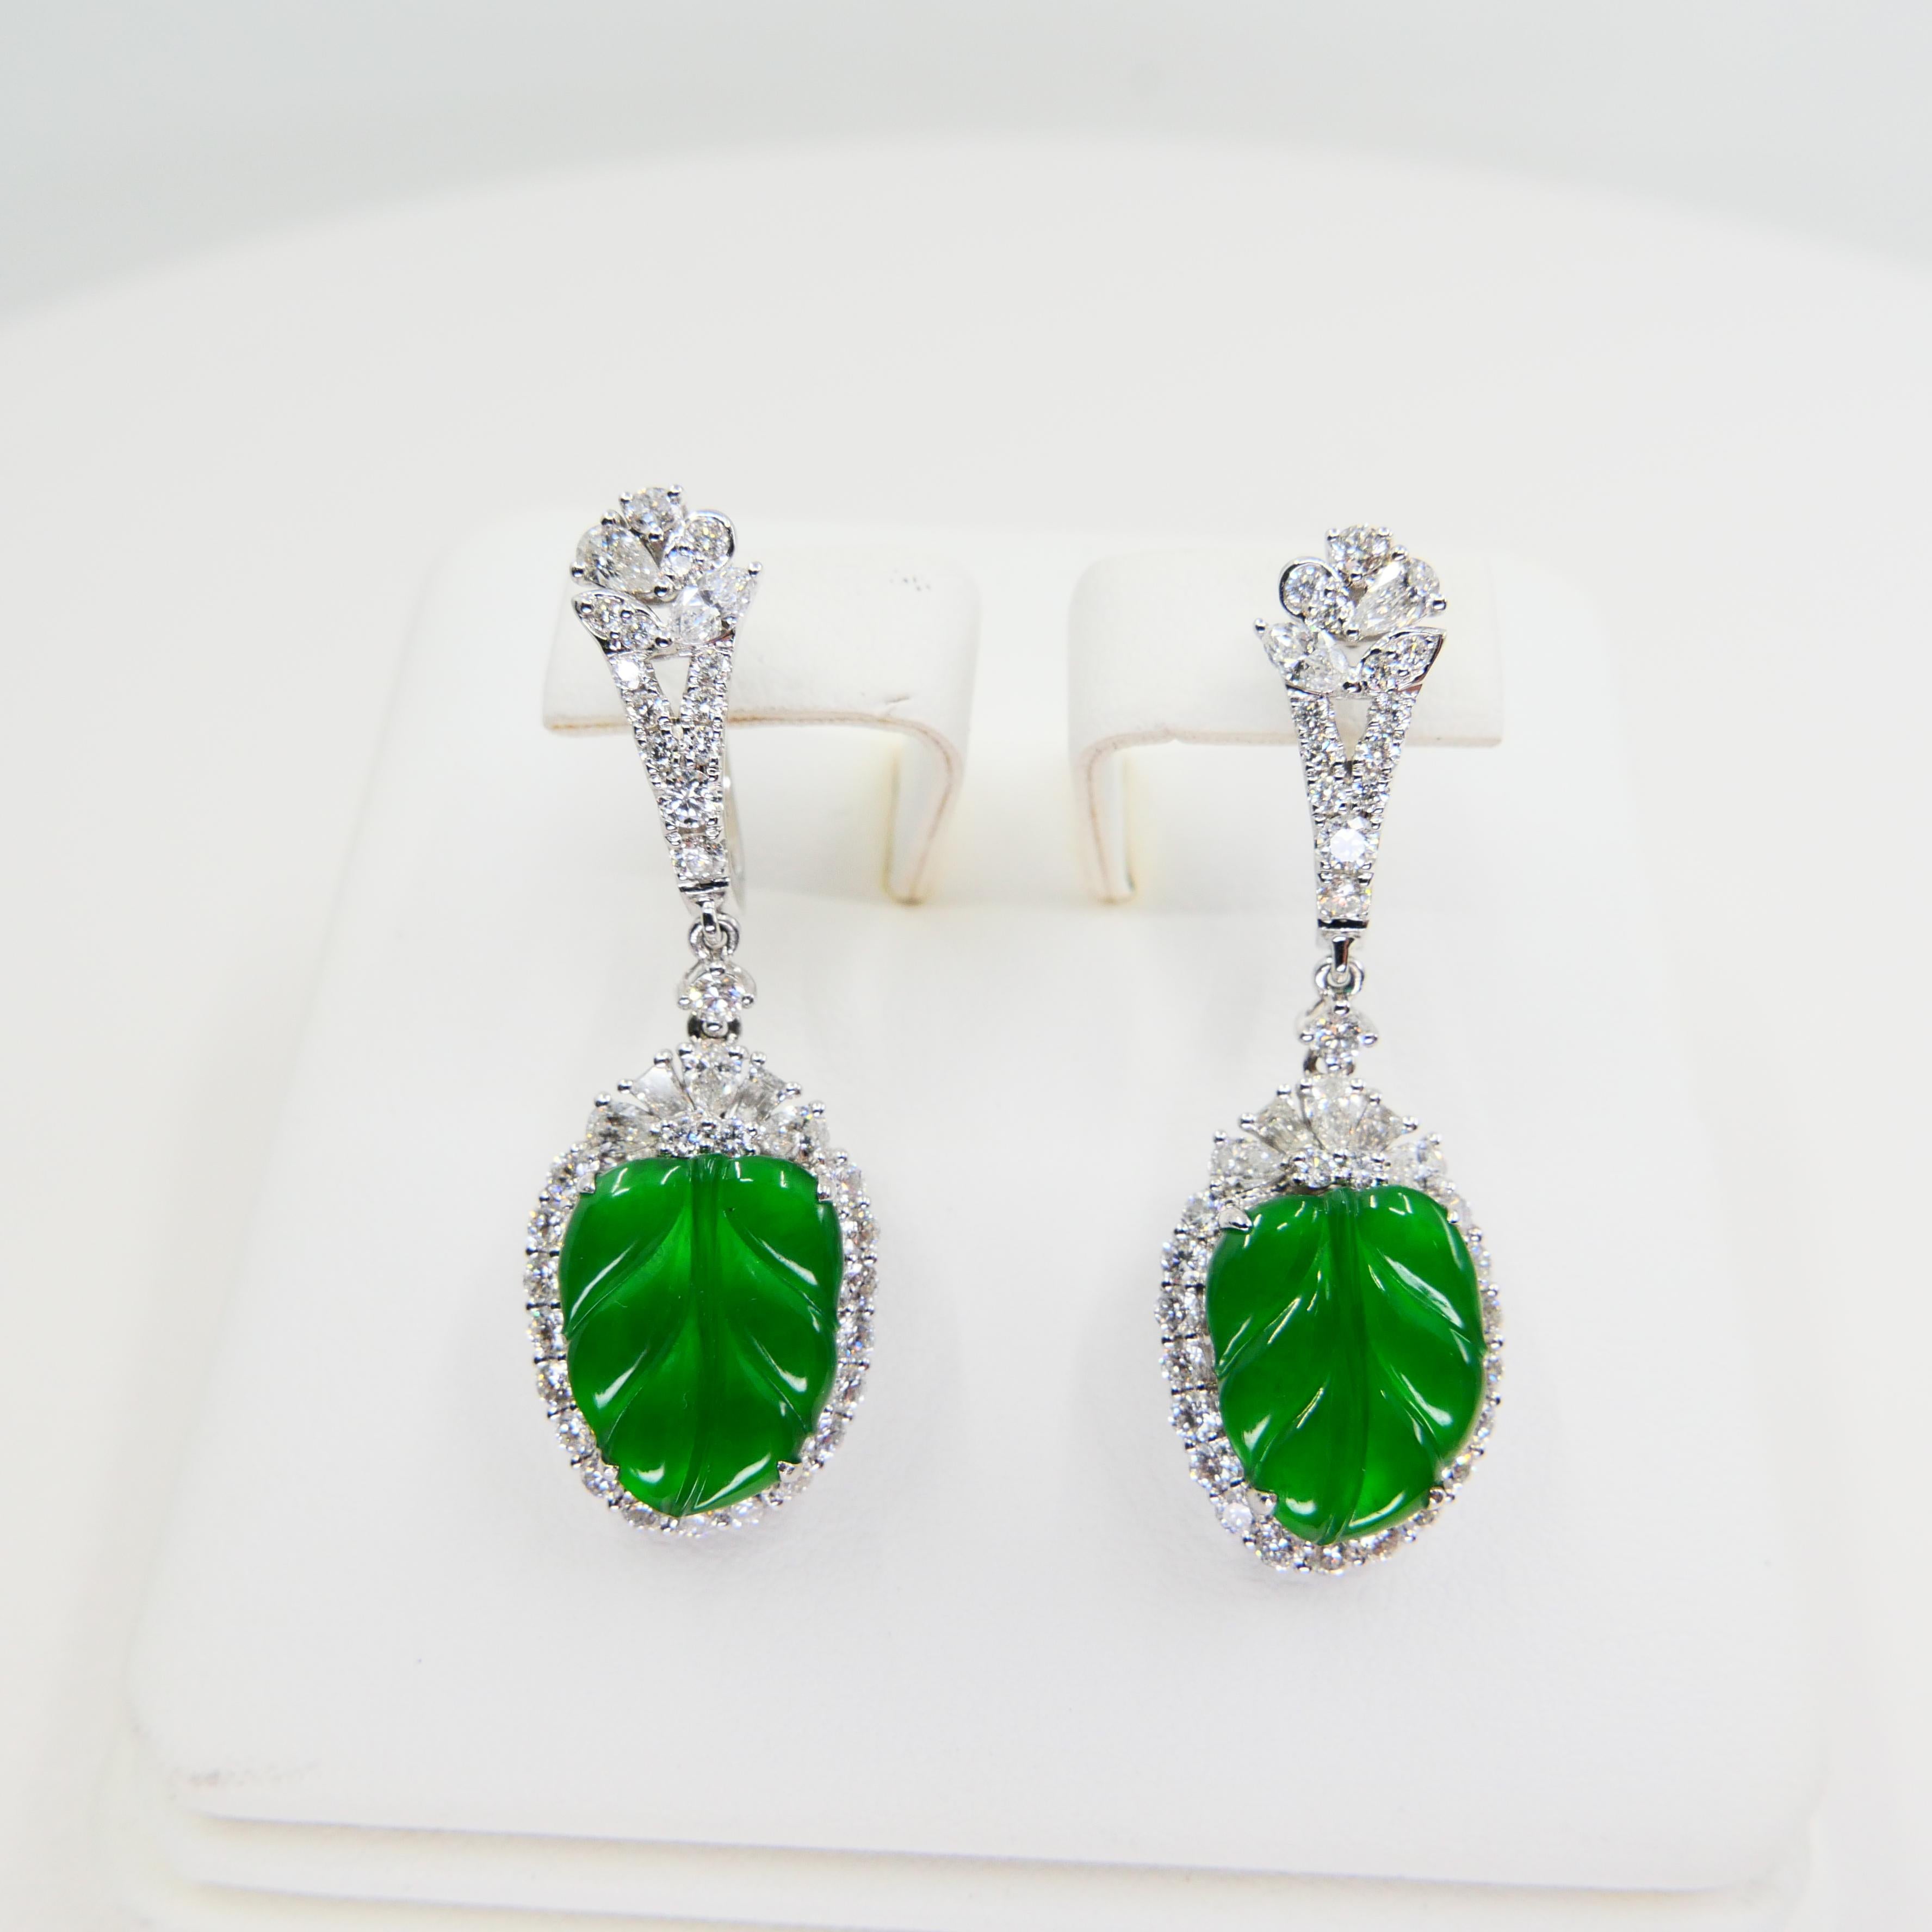 Certified Icy Apple Green Jade and Diamond Earrings, Almost Imperial Green 8